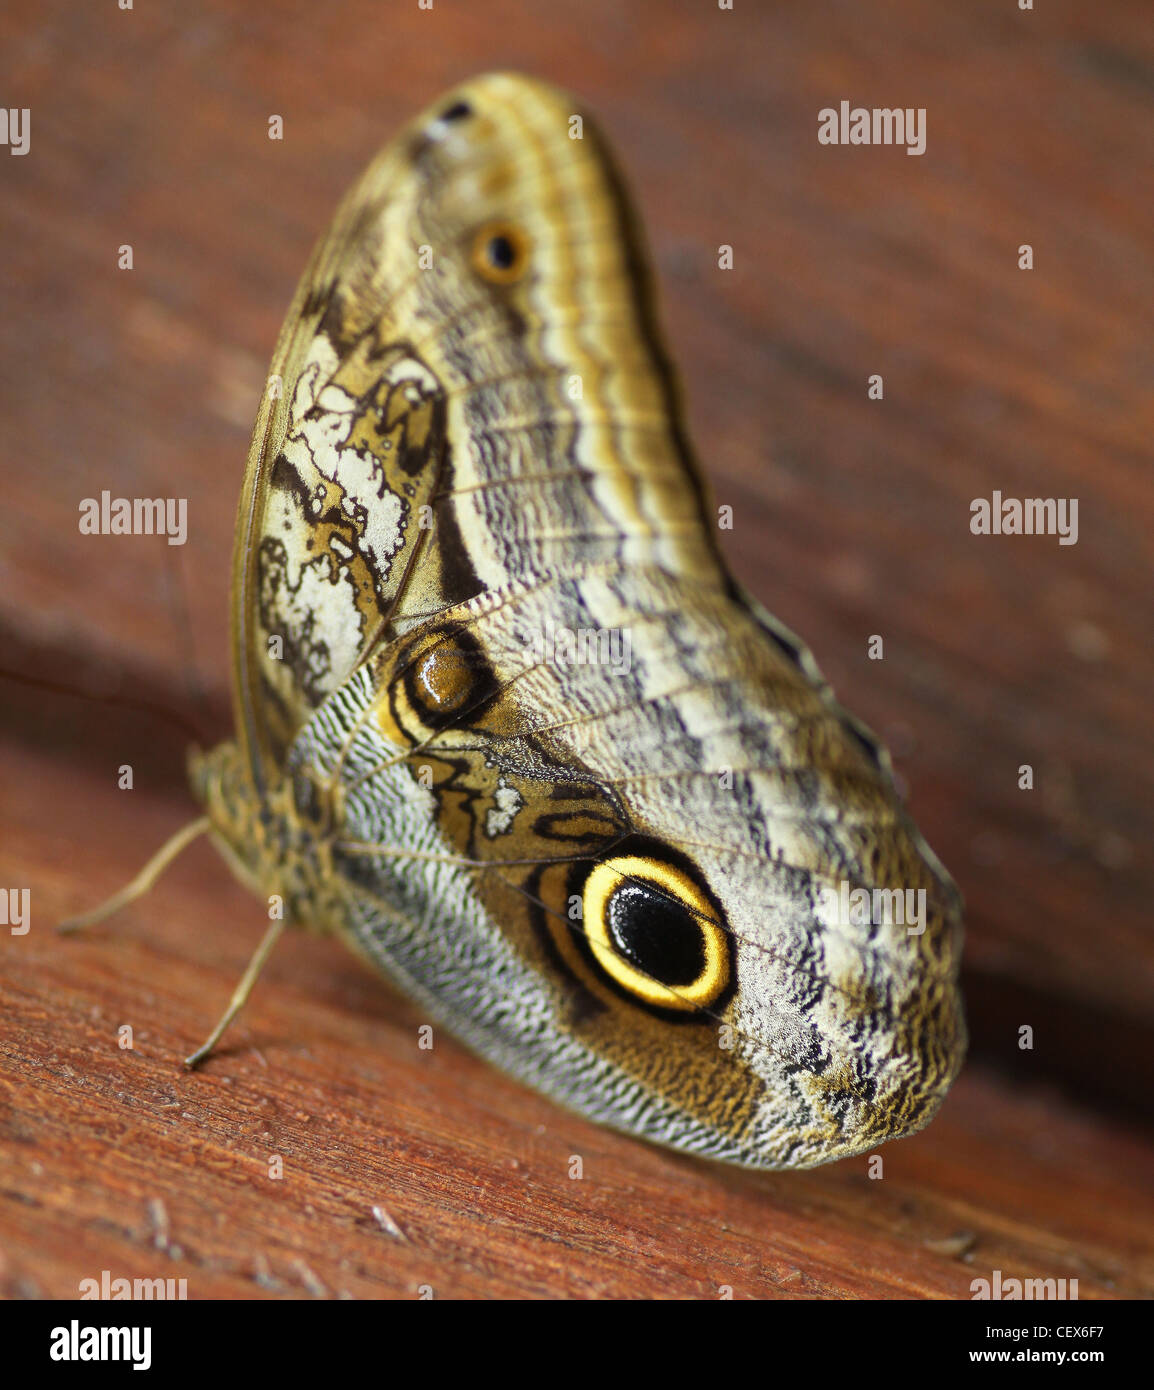 An Owl Butterfly (Caligo Eurilochus) showing the means of warding off predators such as a large eye spot Stock Photo